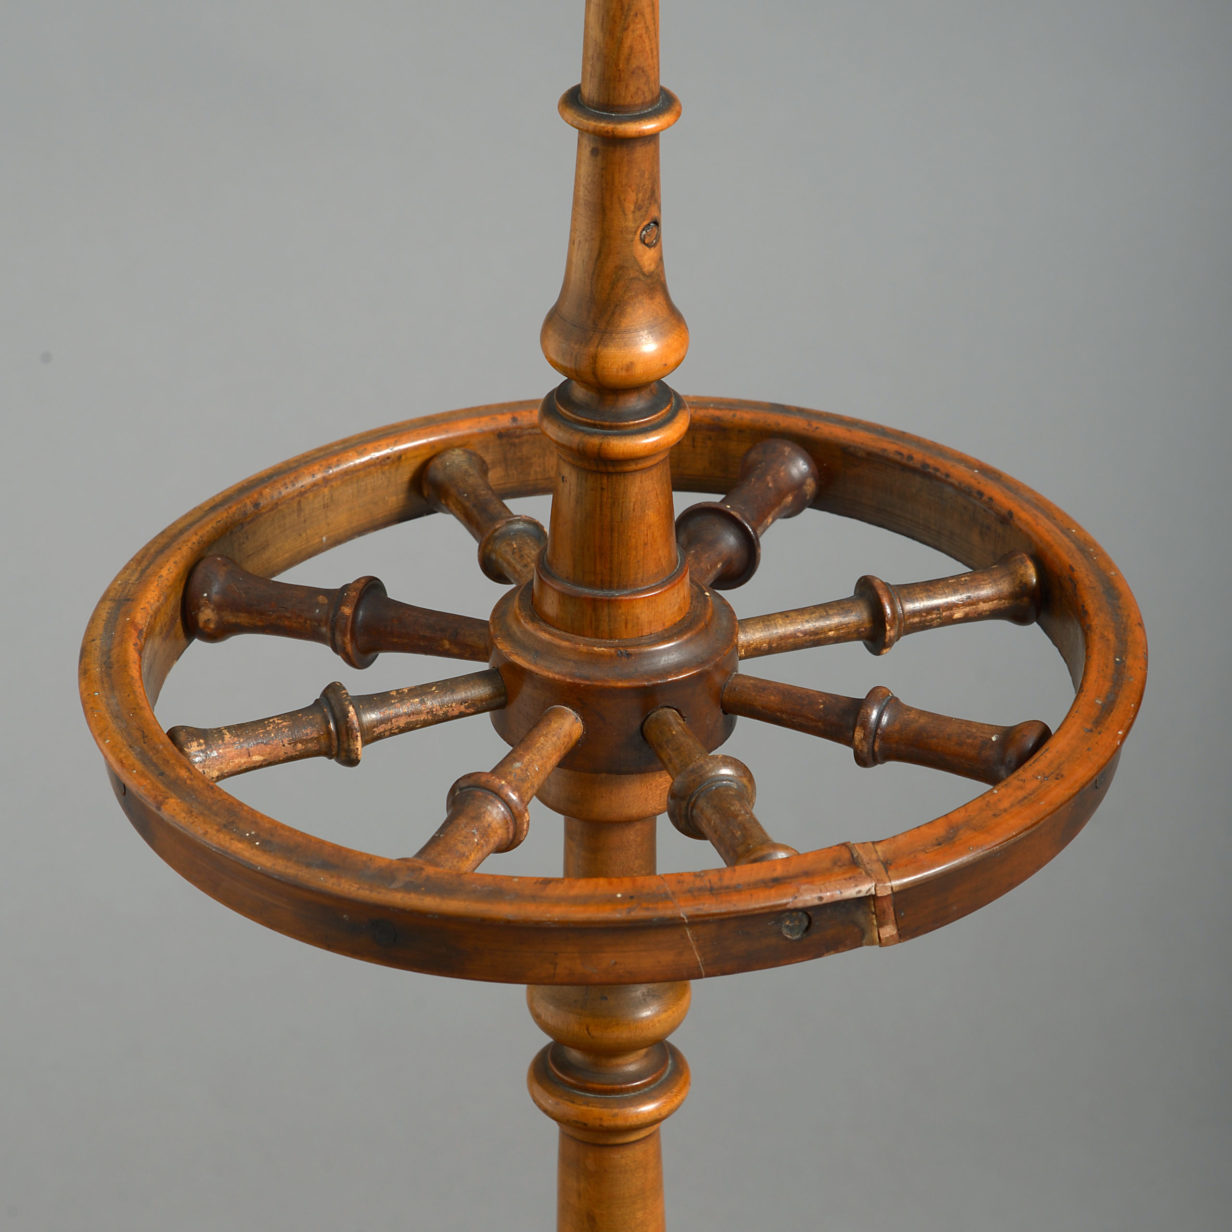 A 19th Century Turned Ship's Wheel Stick or Umbrella Stand